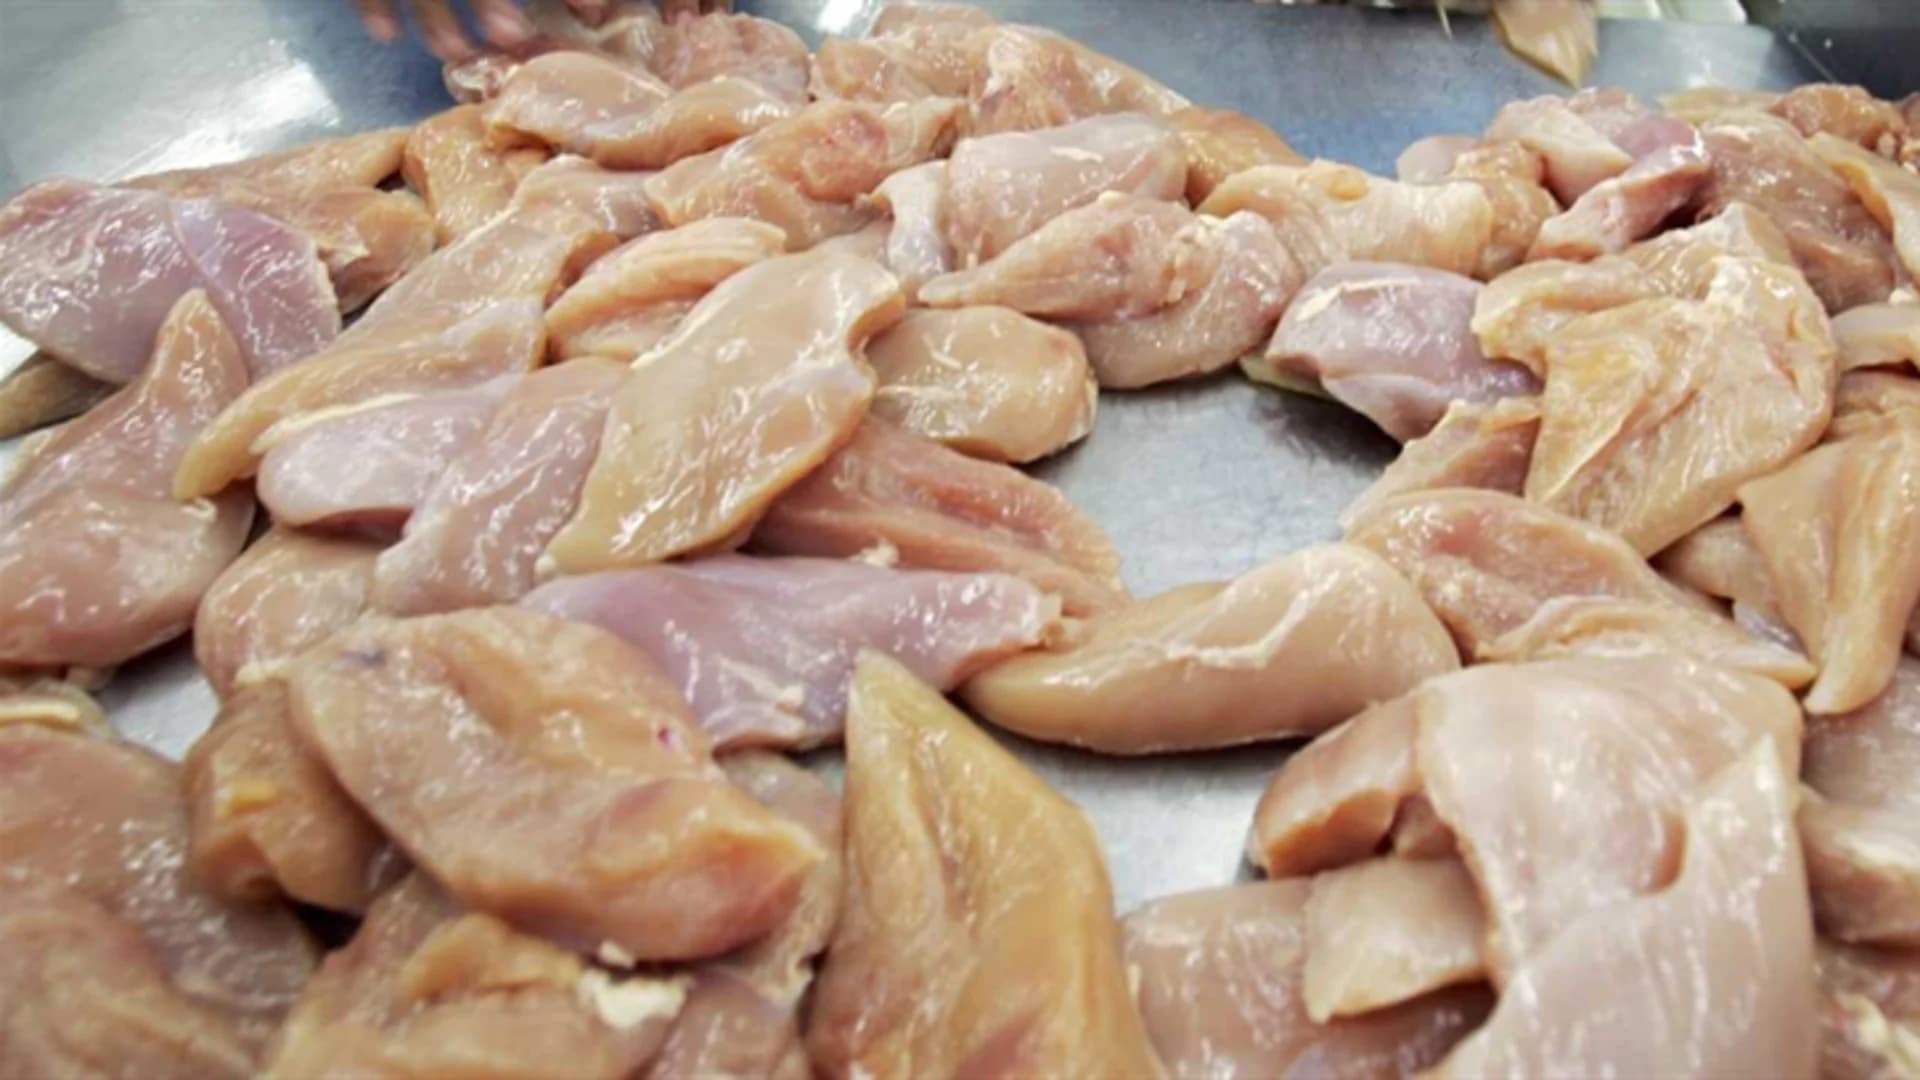 Salmonella outbreak linked to raw chicken sickens 92 people in 29 states